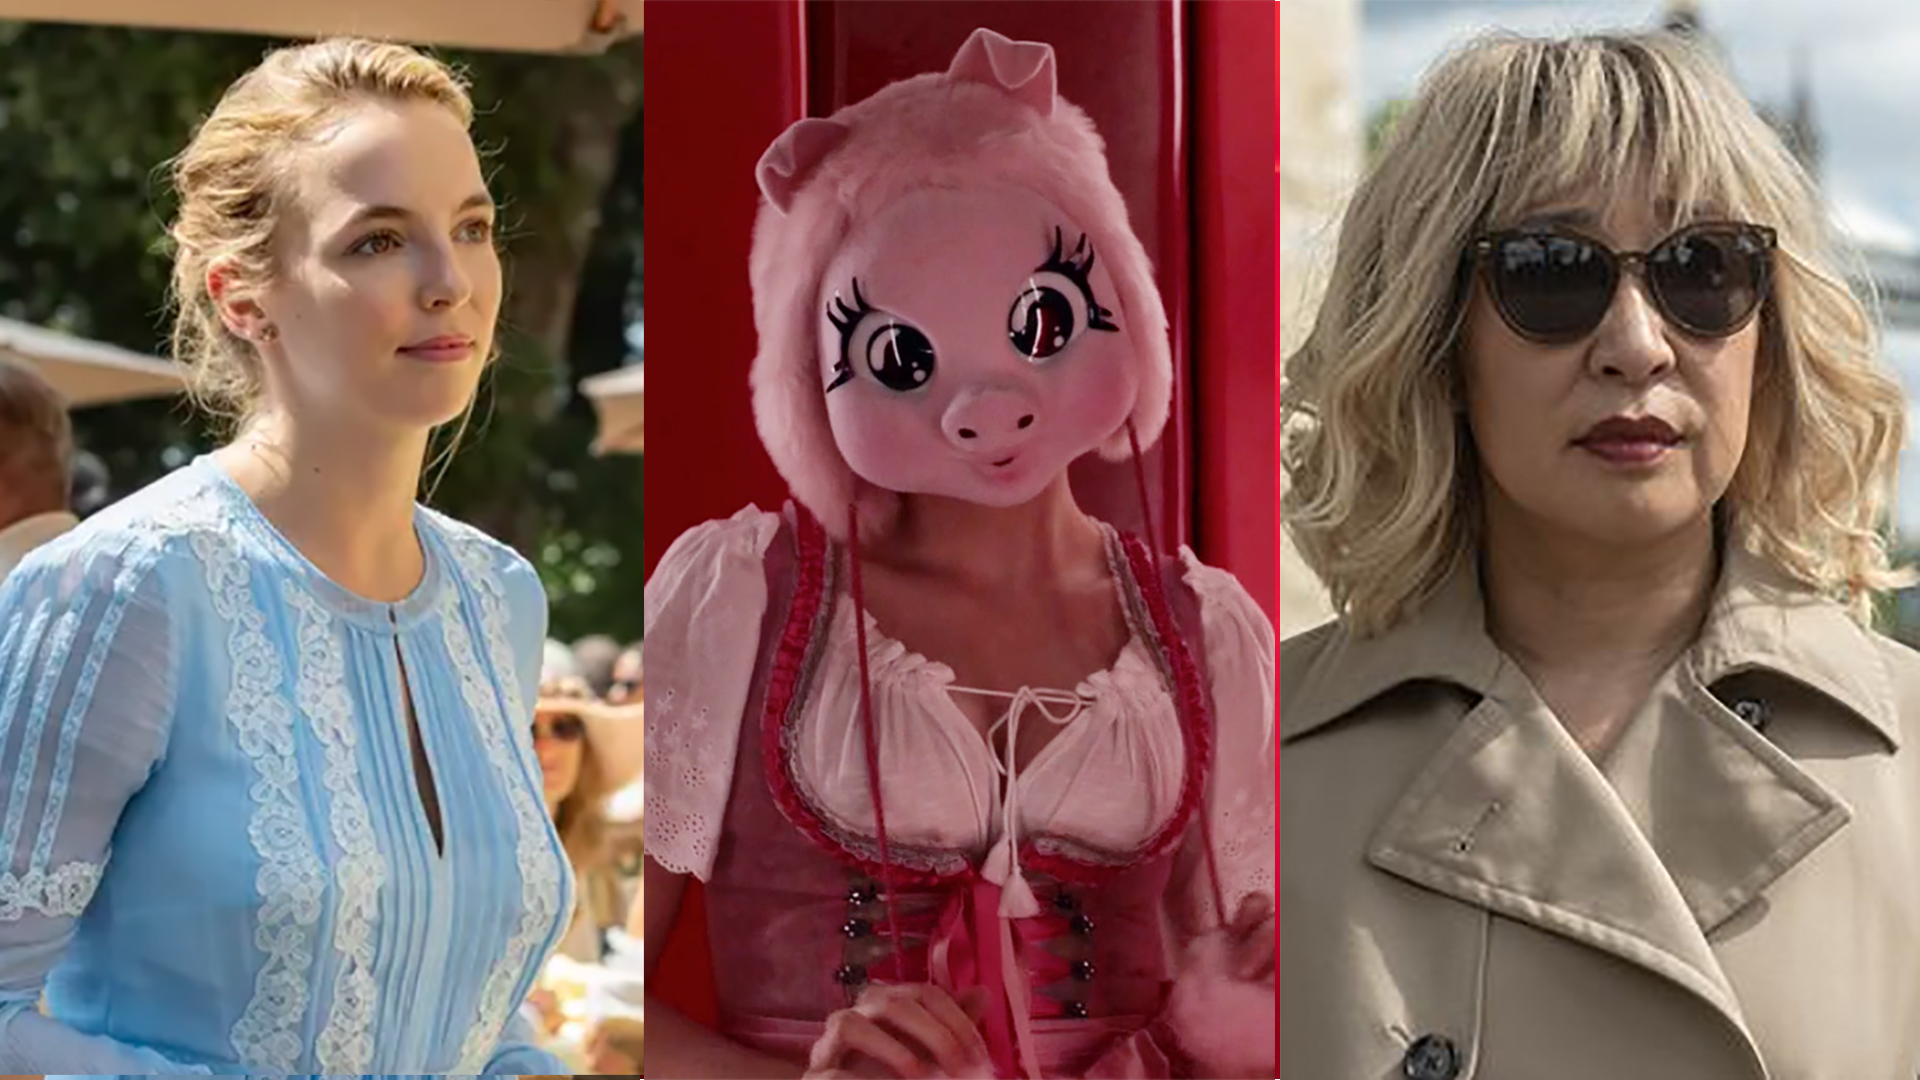 10 ‘Killing Eve’ Disguises: From Party Guest to Masked Dominatrix, Landing on Blonde Ambition